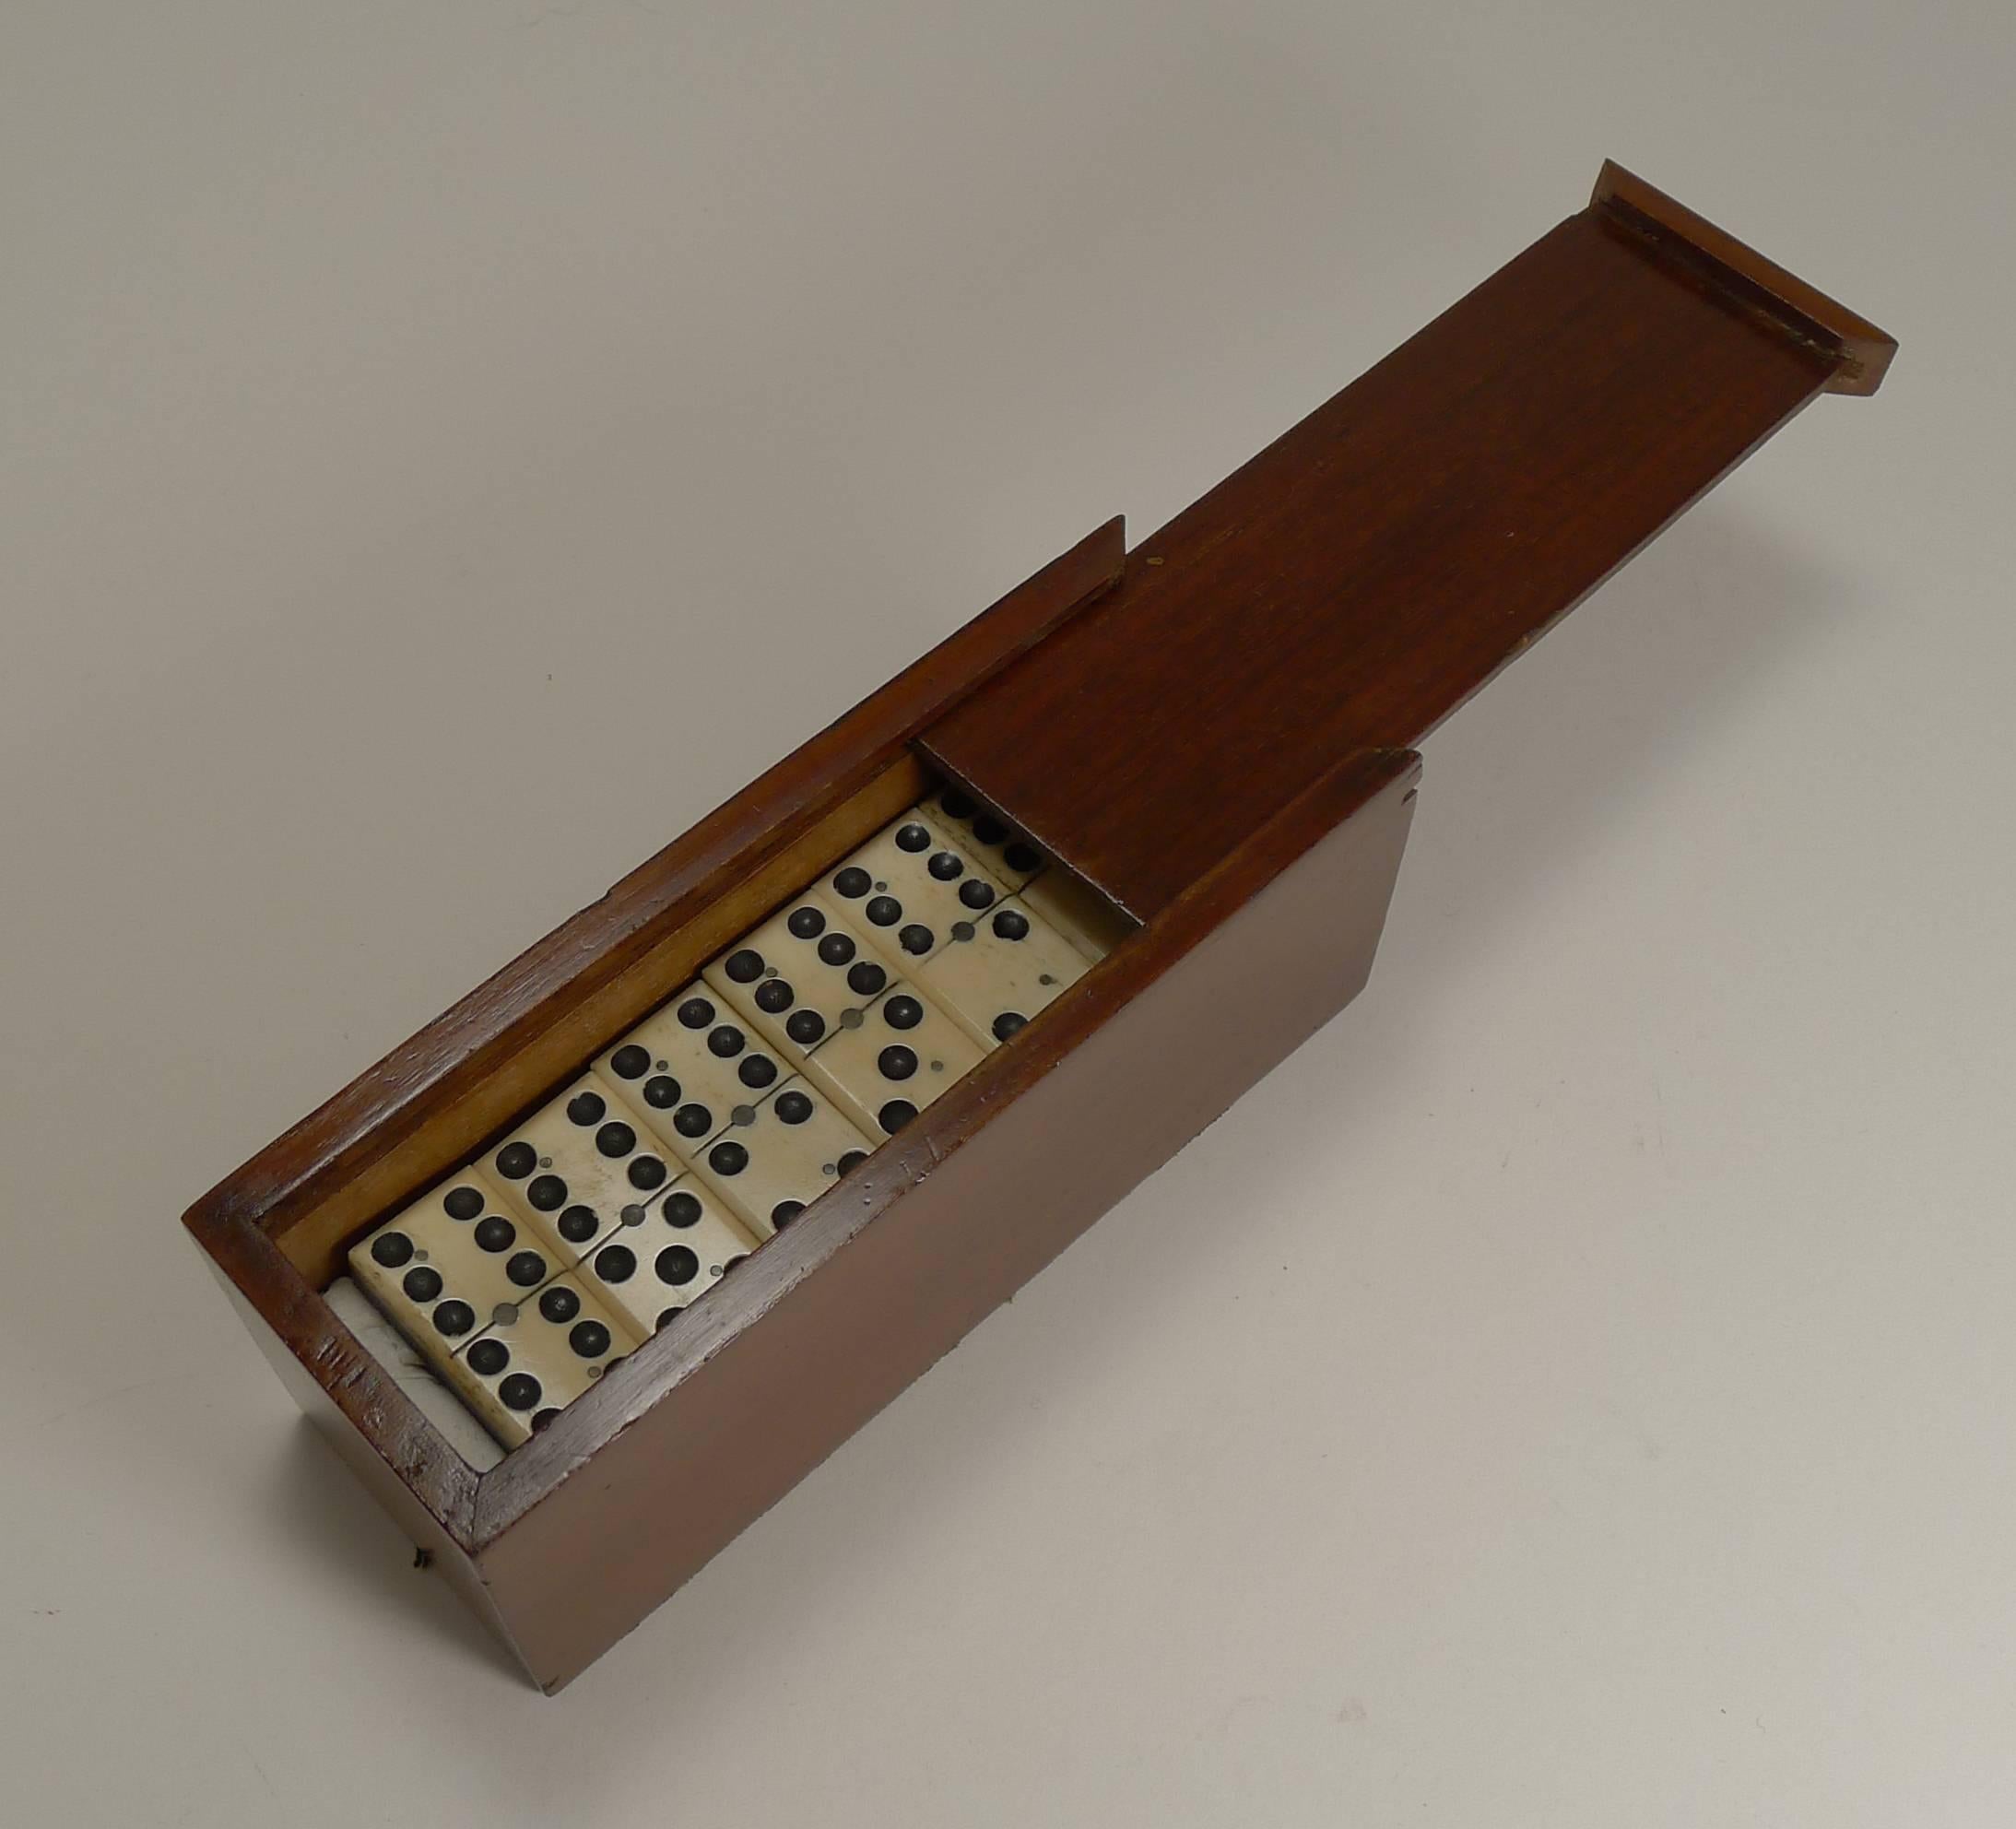 A charming set of late Victorian dominoes or dominos, all in wonderful condition with a handsome polished wooden storage box with a sliding lid.

Dating to circa 1890, the set is better than most with a quality finish, each Domino with canted